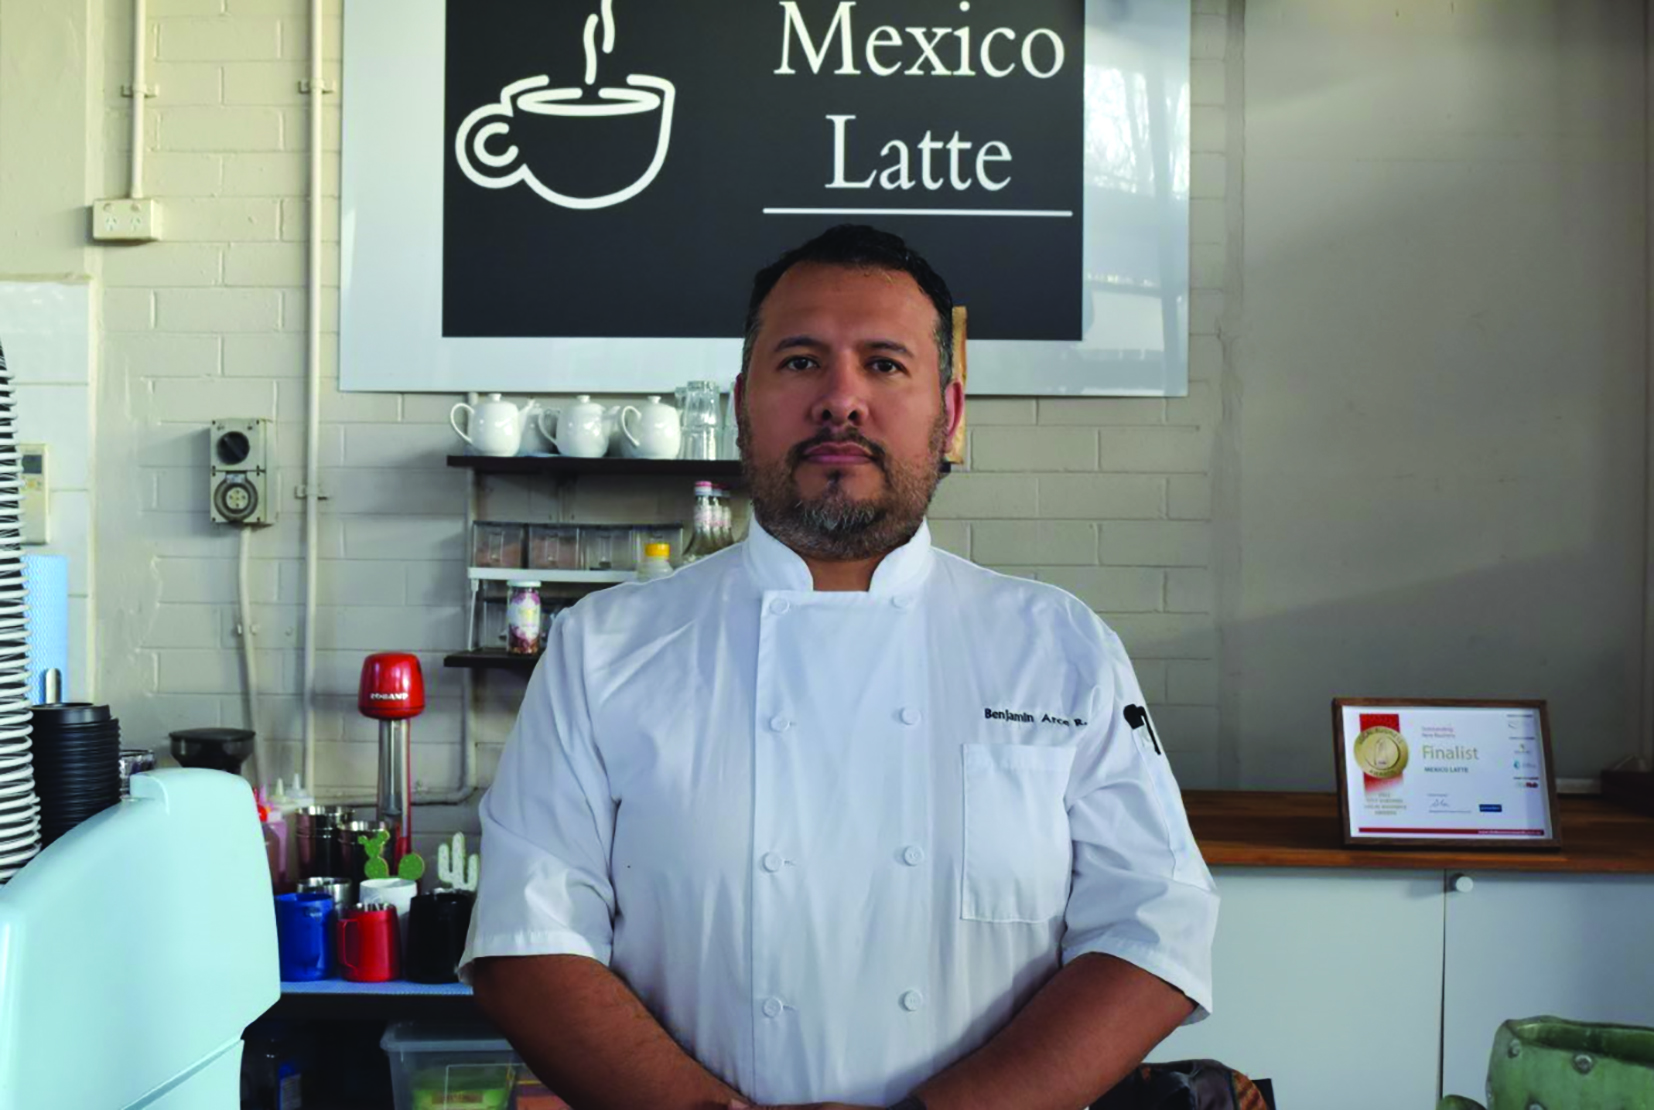 BEST MEXICAN FOOD – Mexico Latte